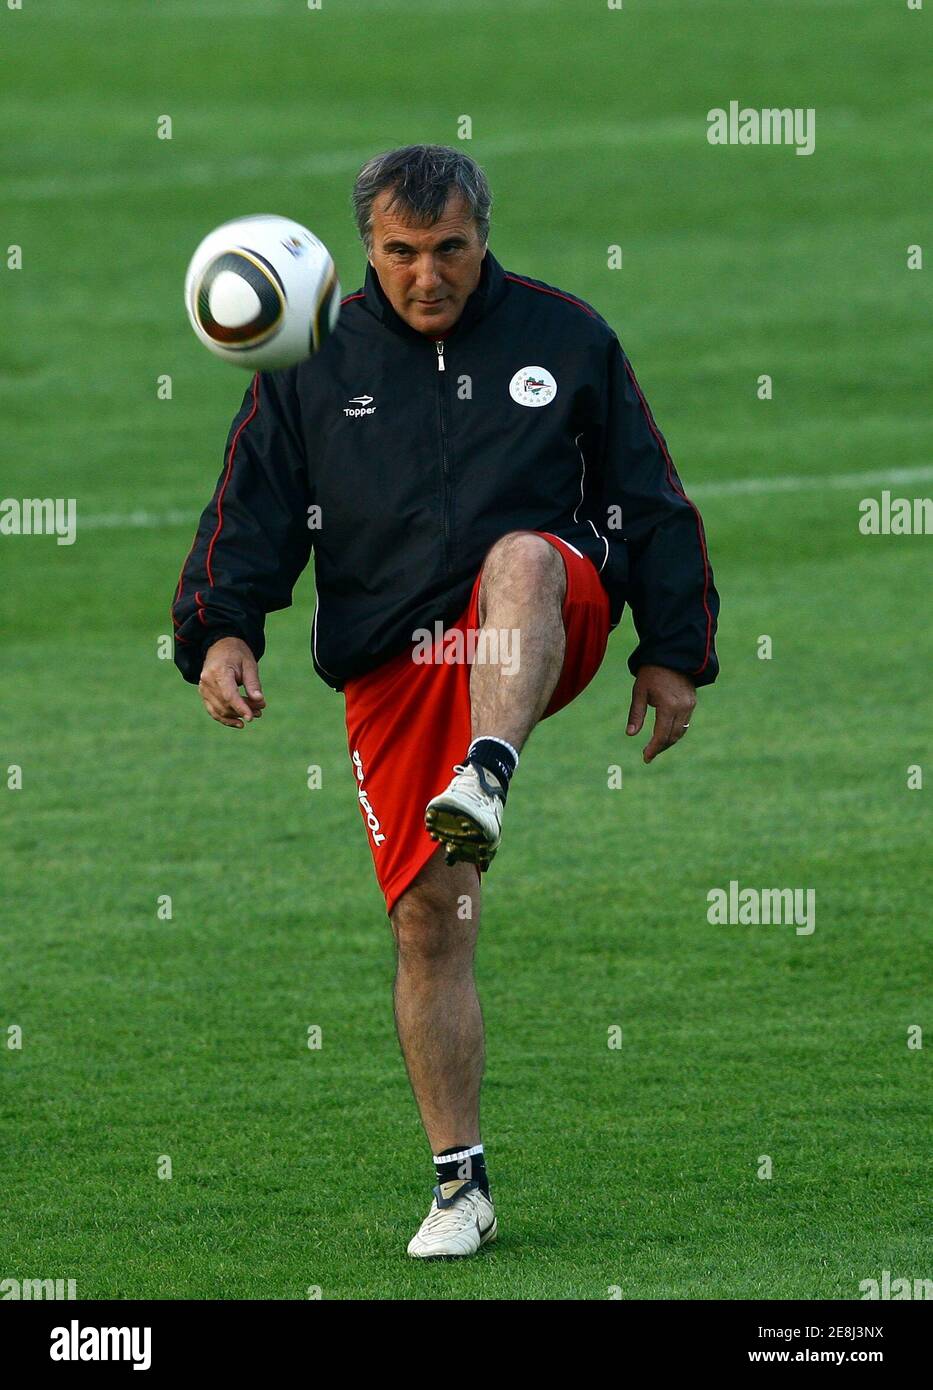 Estudiantes' assistant coach Claudio Gugnali kicks the ball during a training session in Abu Dhabi December 18, 2009. Argentina's Estudiantes, the South American champions, play Barcelona in Saturday's FIFA Club World Cup final soccer match. REUTERS/Fahad Shadeed (UNITED ARAB EMIRATES - Tags: SPORT SOCCER) Stock Photo